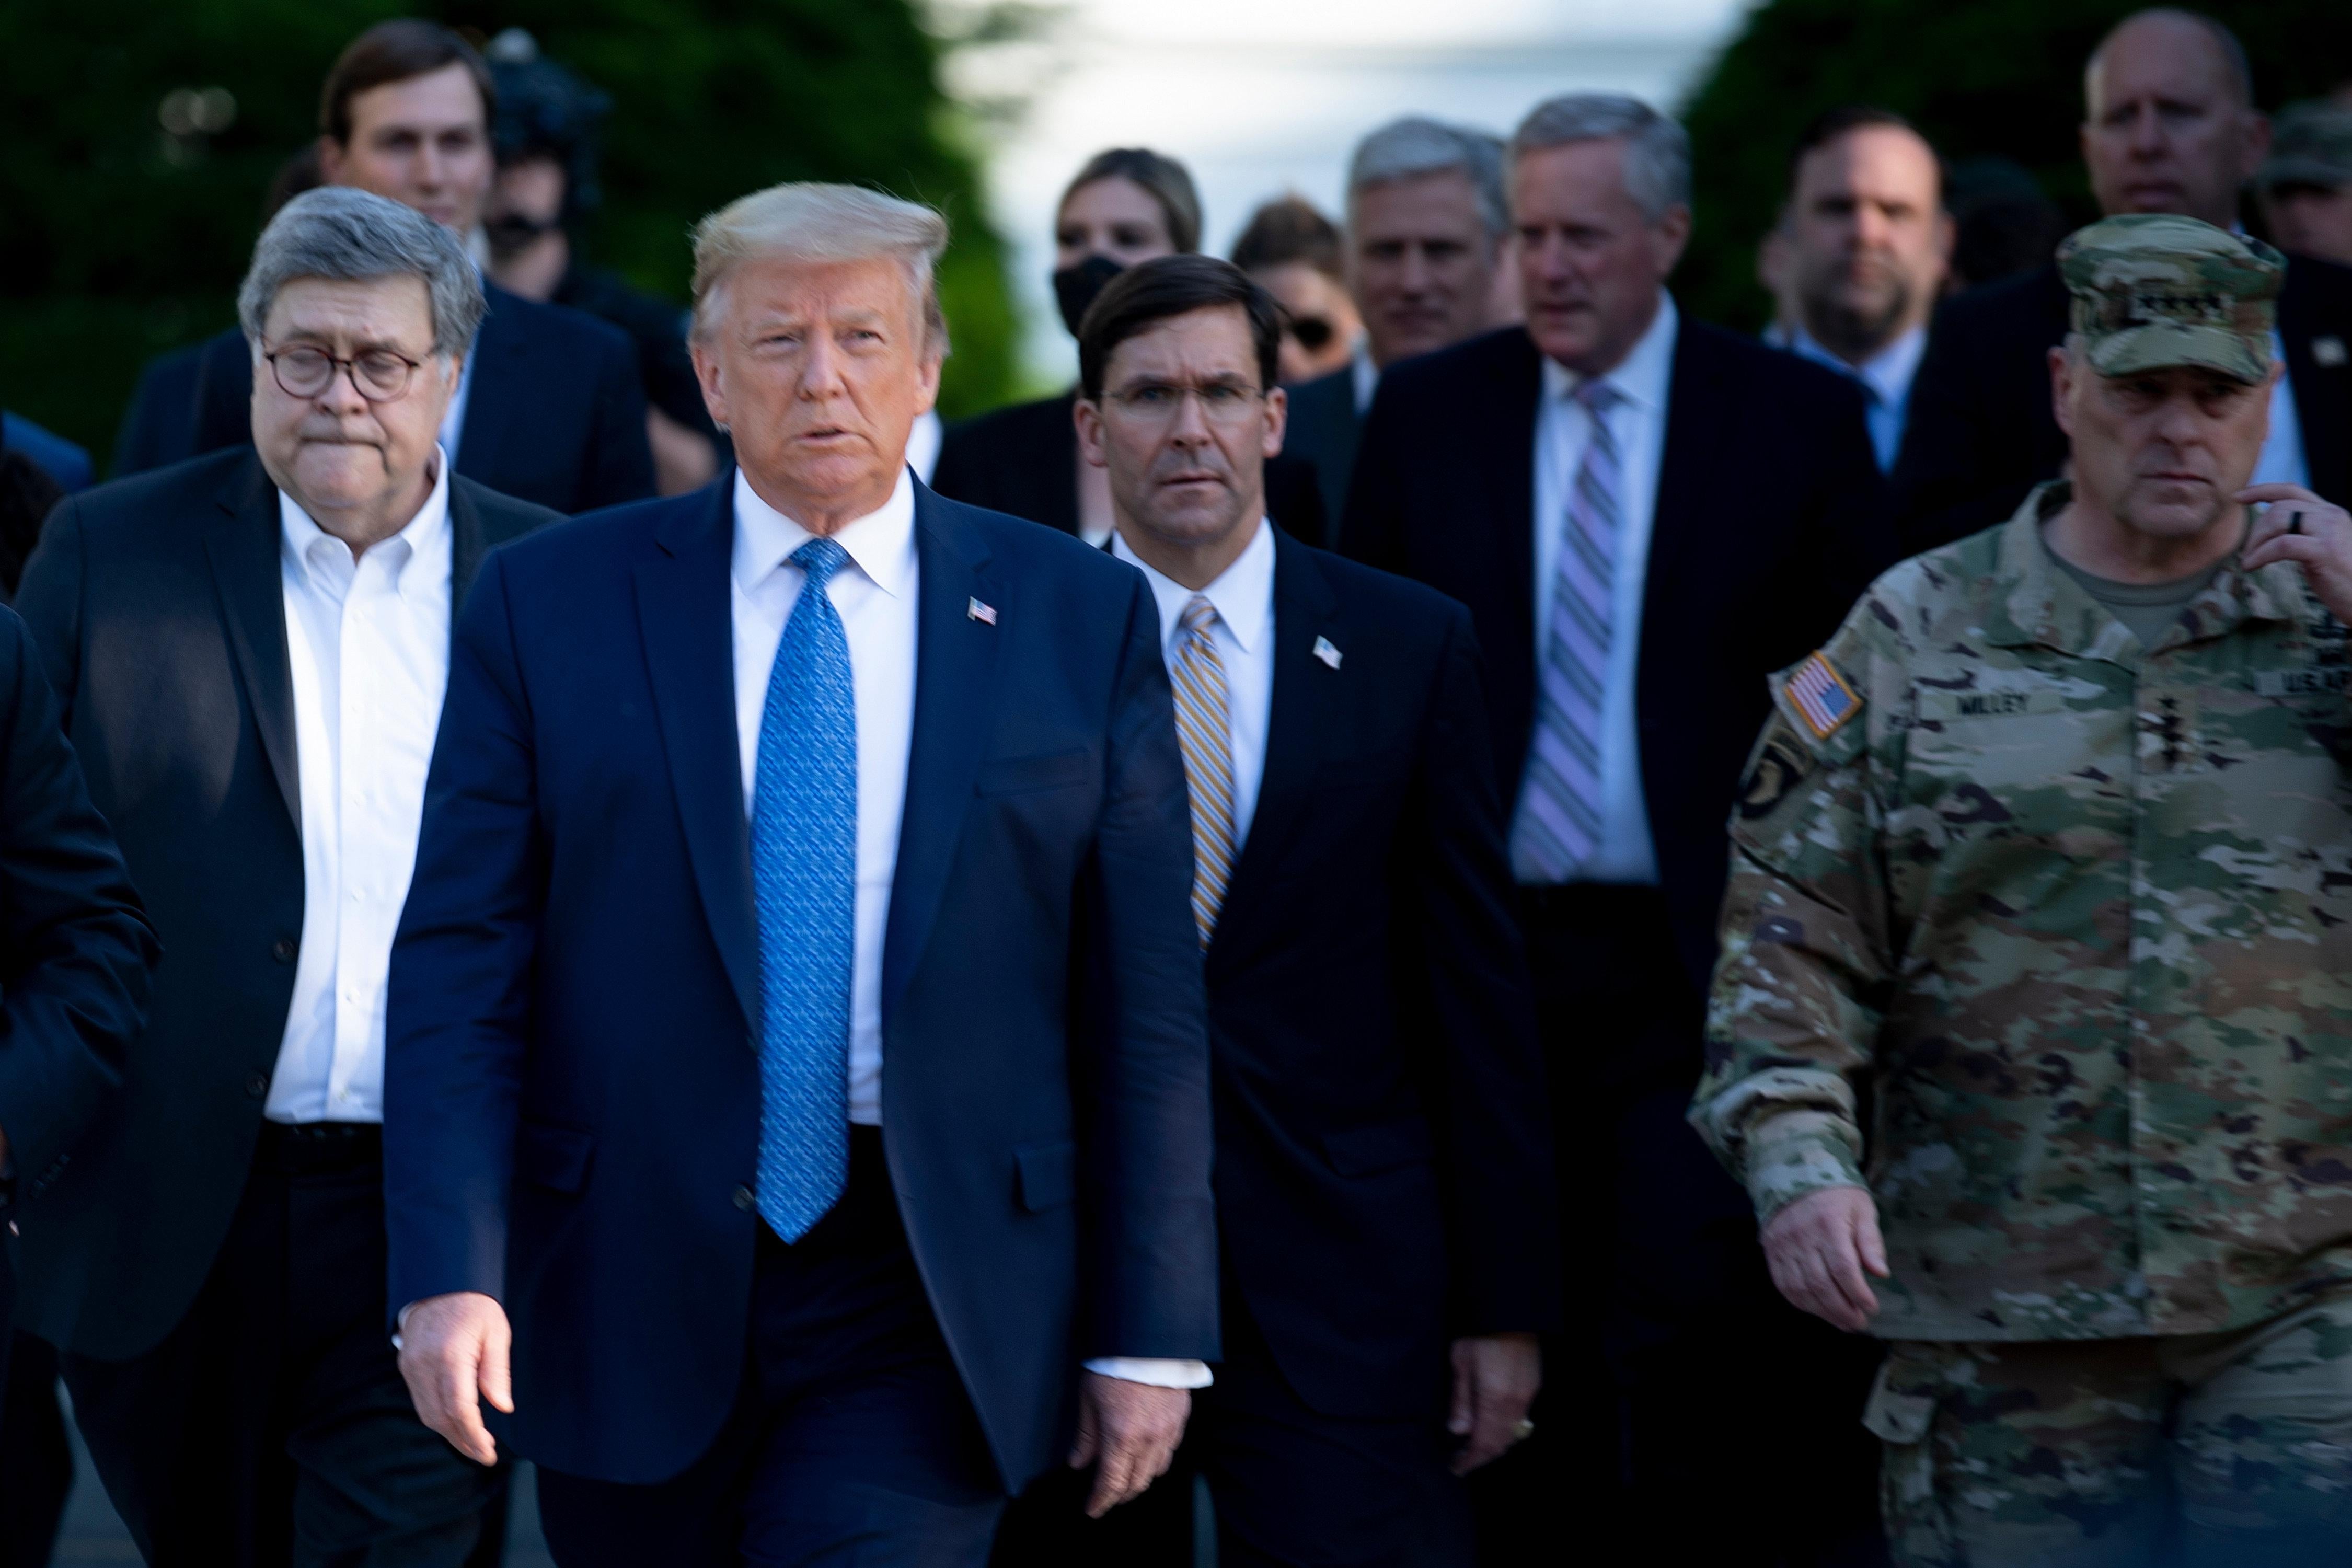 Trump walking outdoors, surrounded by white men